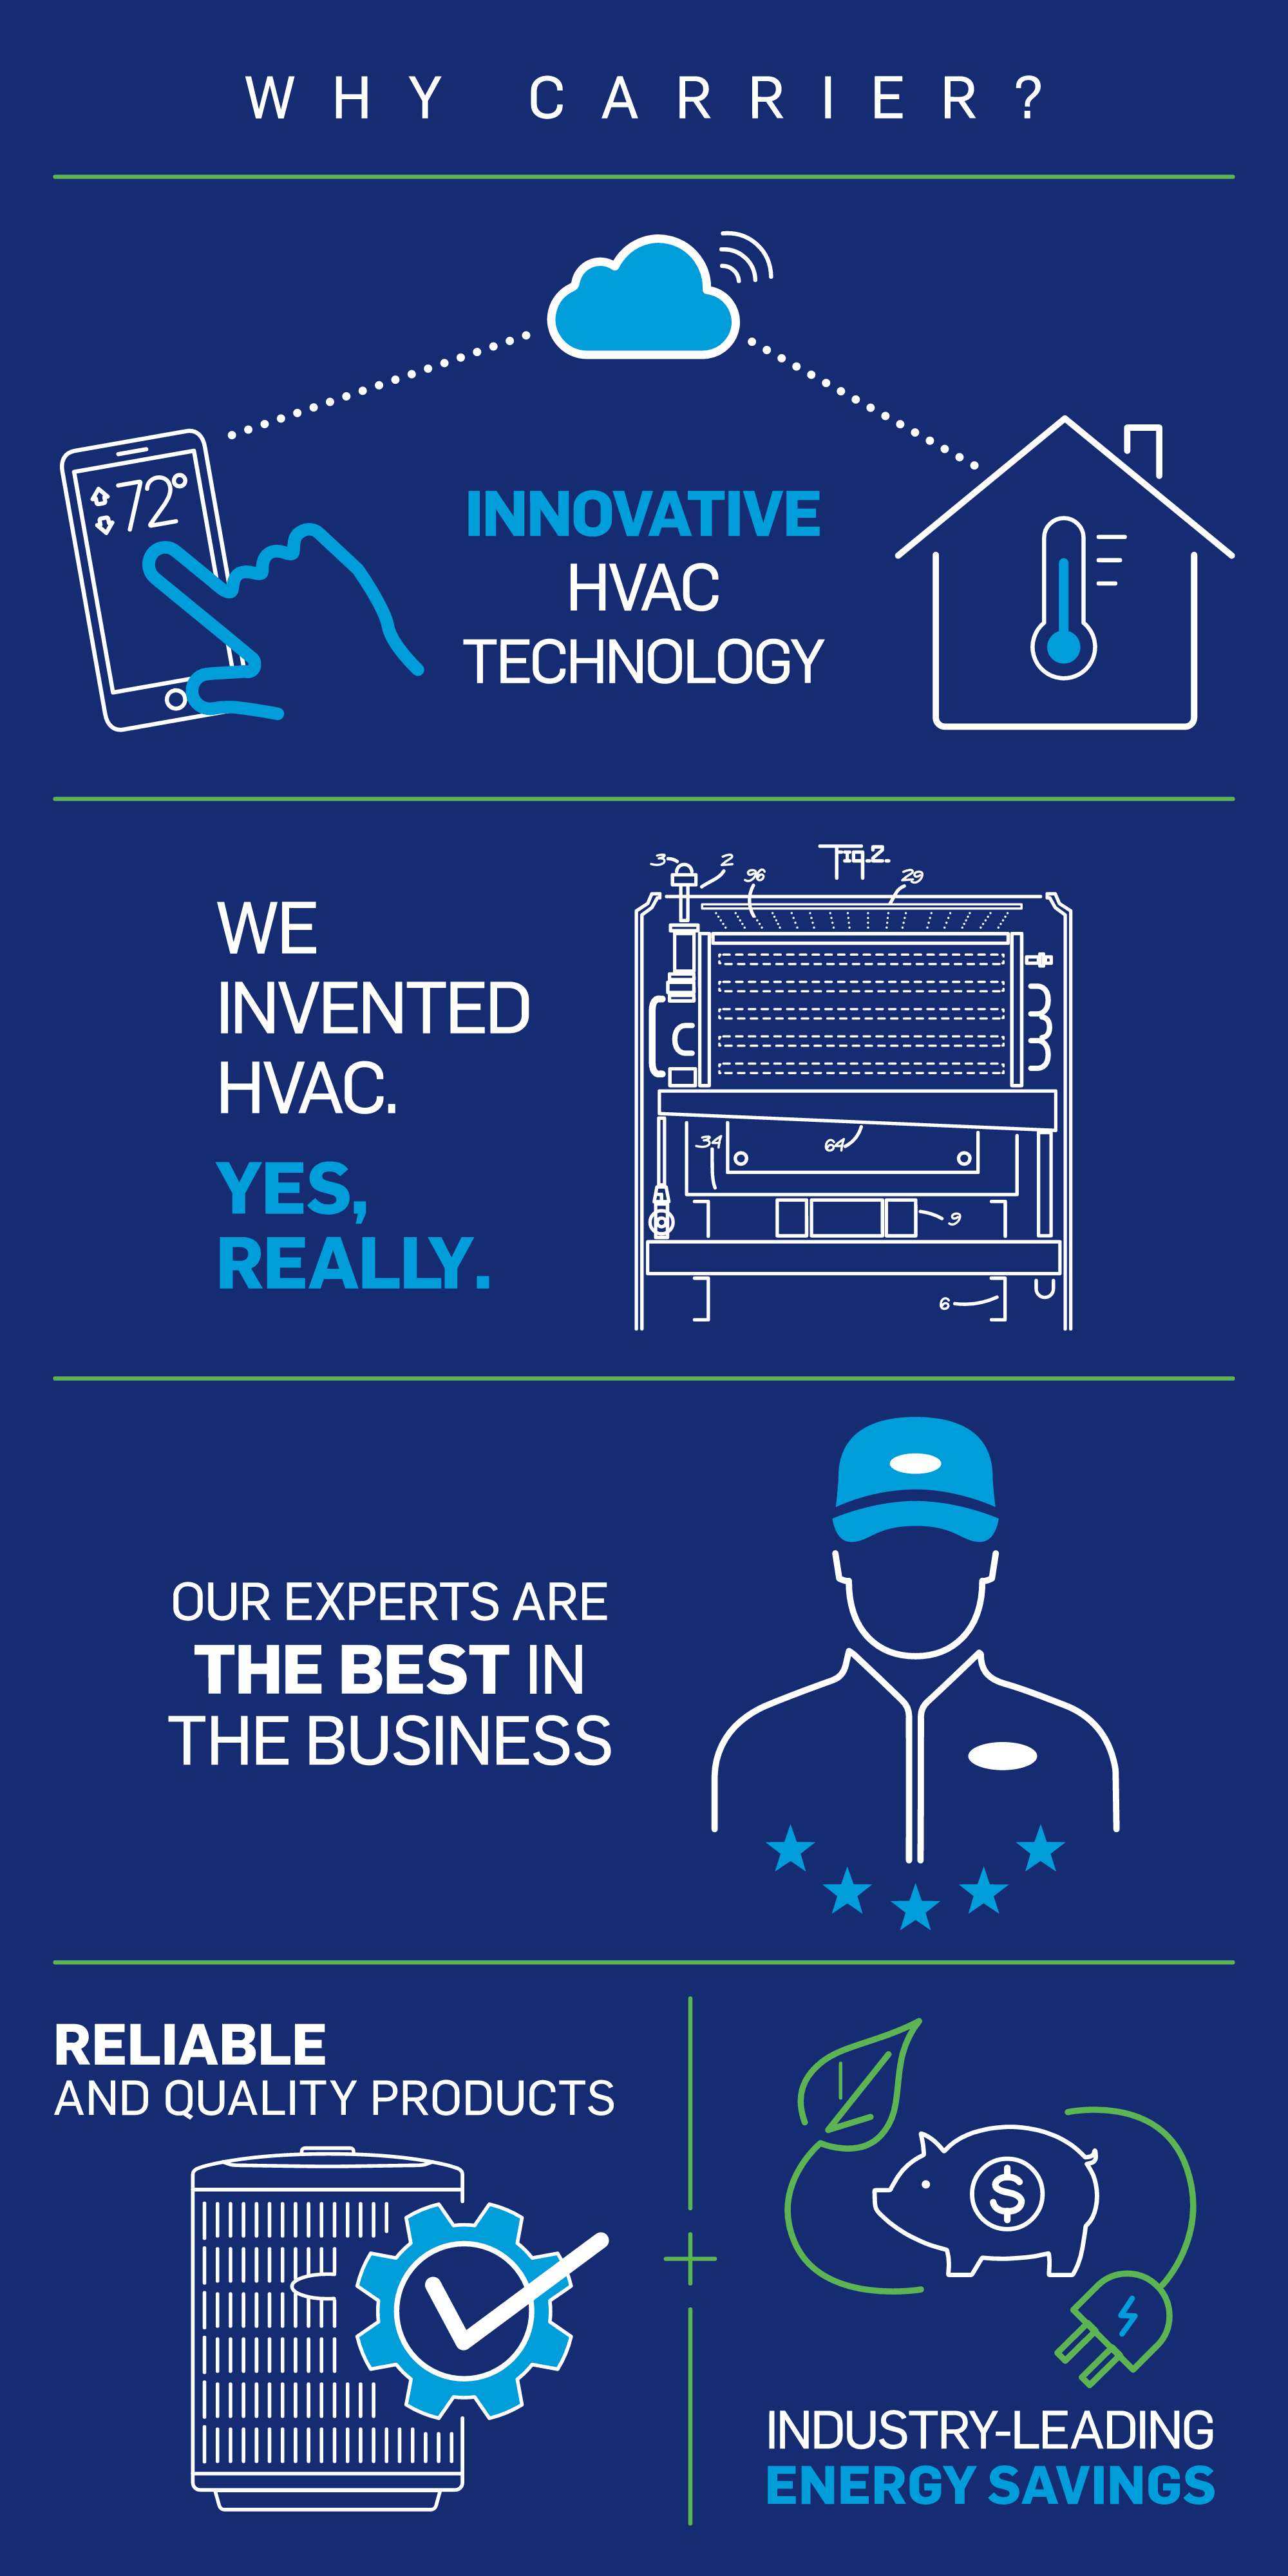 why-choose-carrier-products-infographic-mb